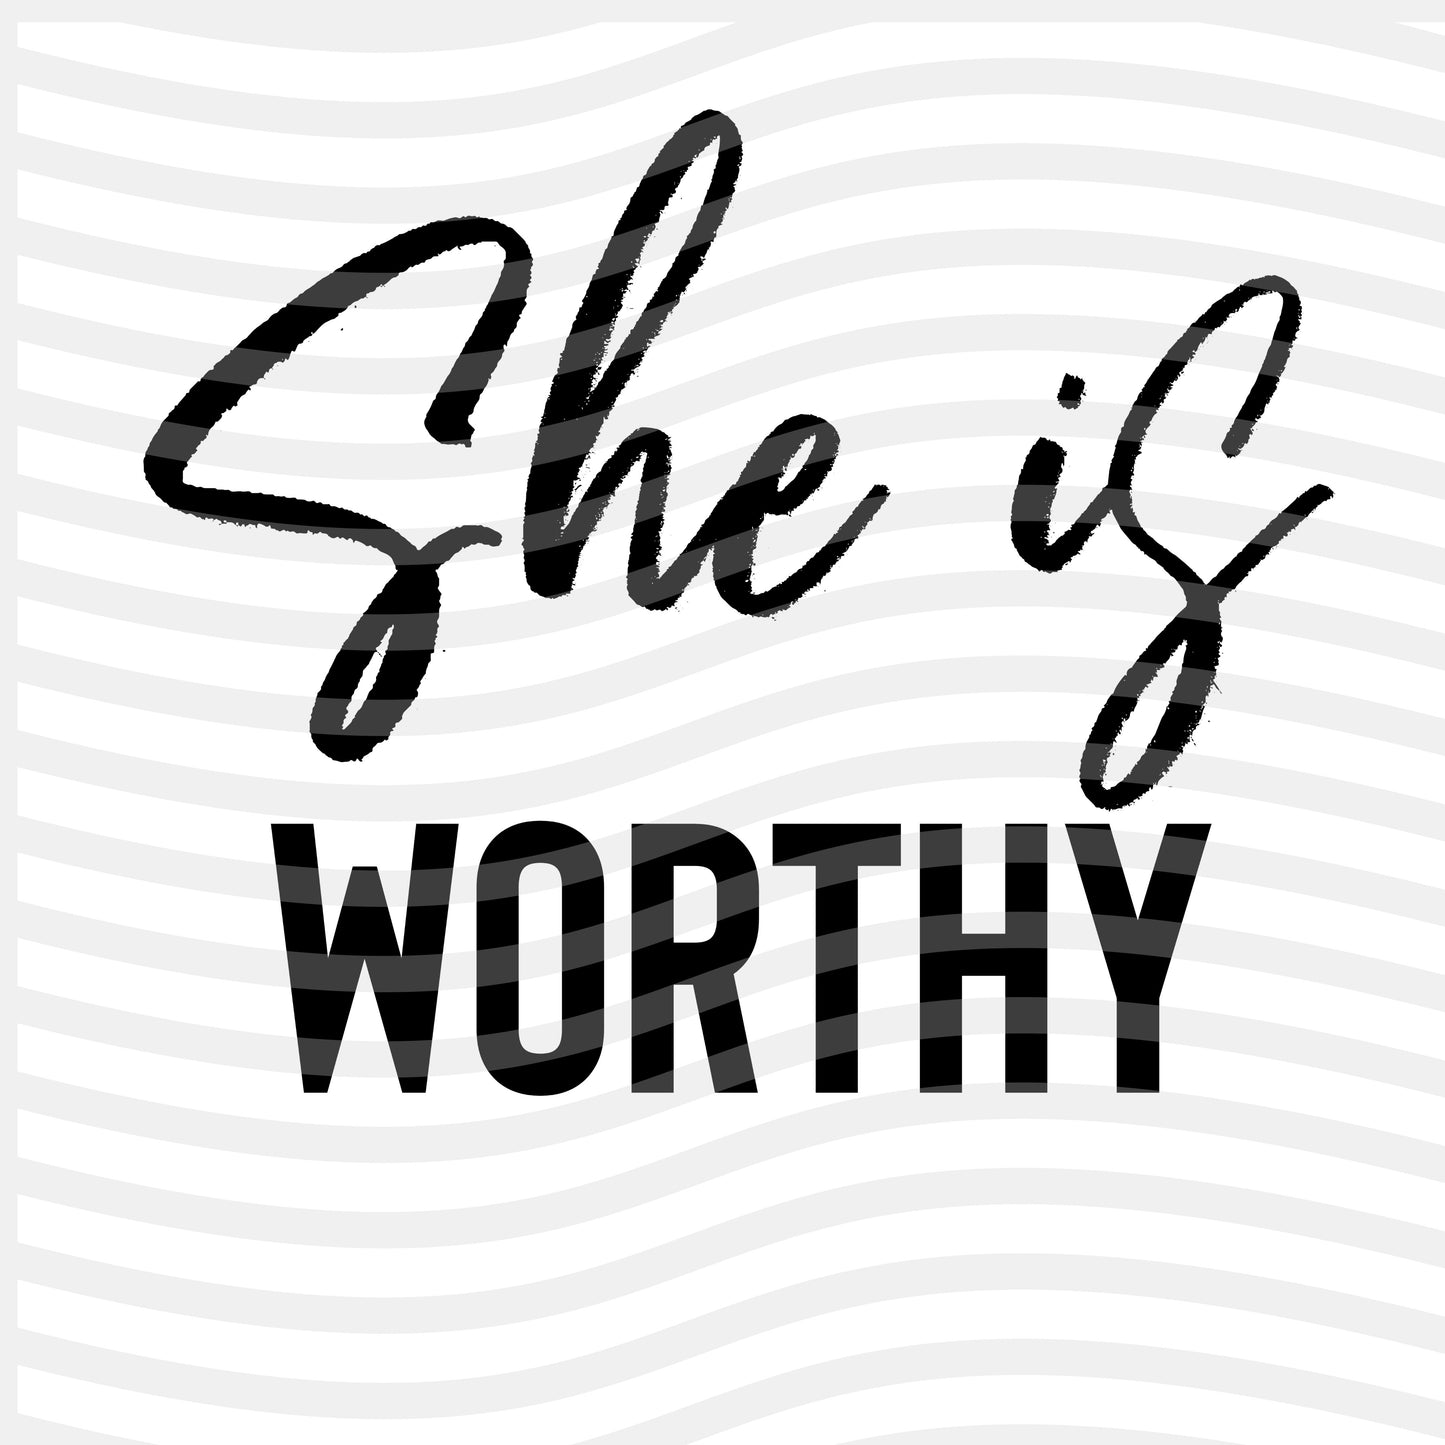 She is Worthy